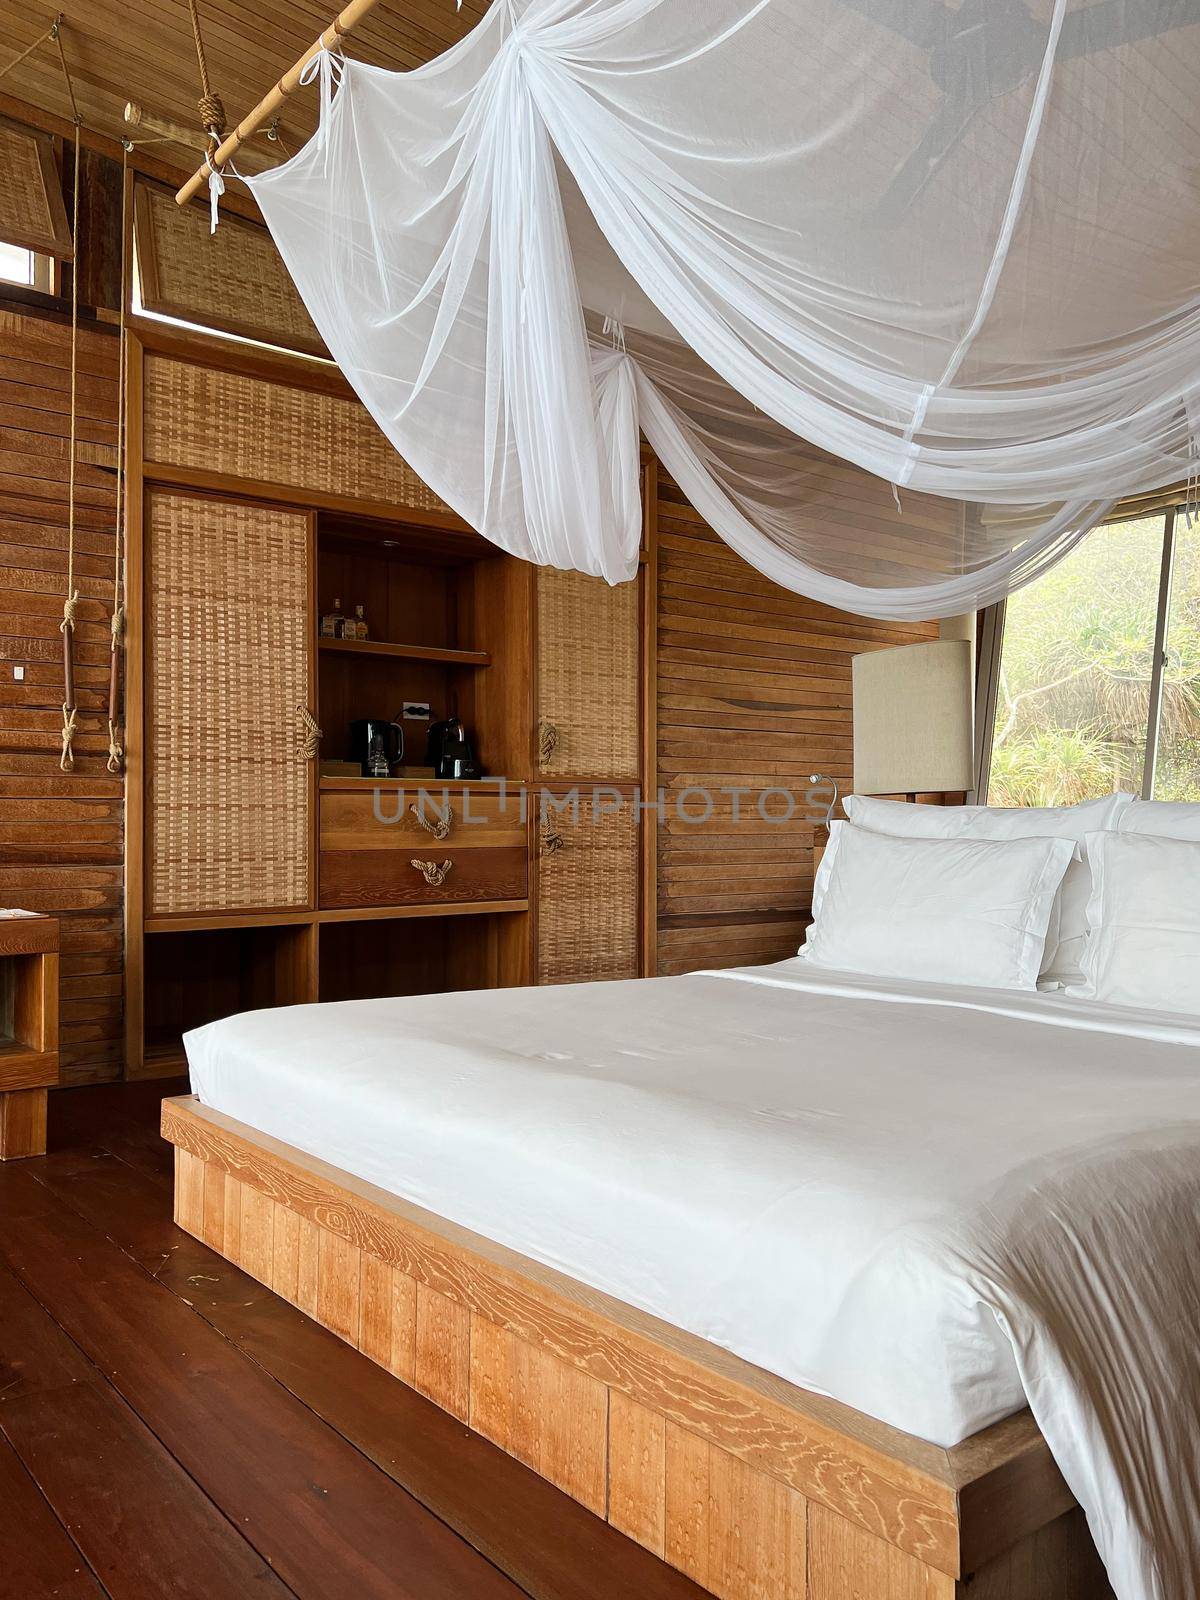 interior wooden tropical resort with bed, bedding and lighting decor on hill in tropical rainforest by makidotvn